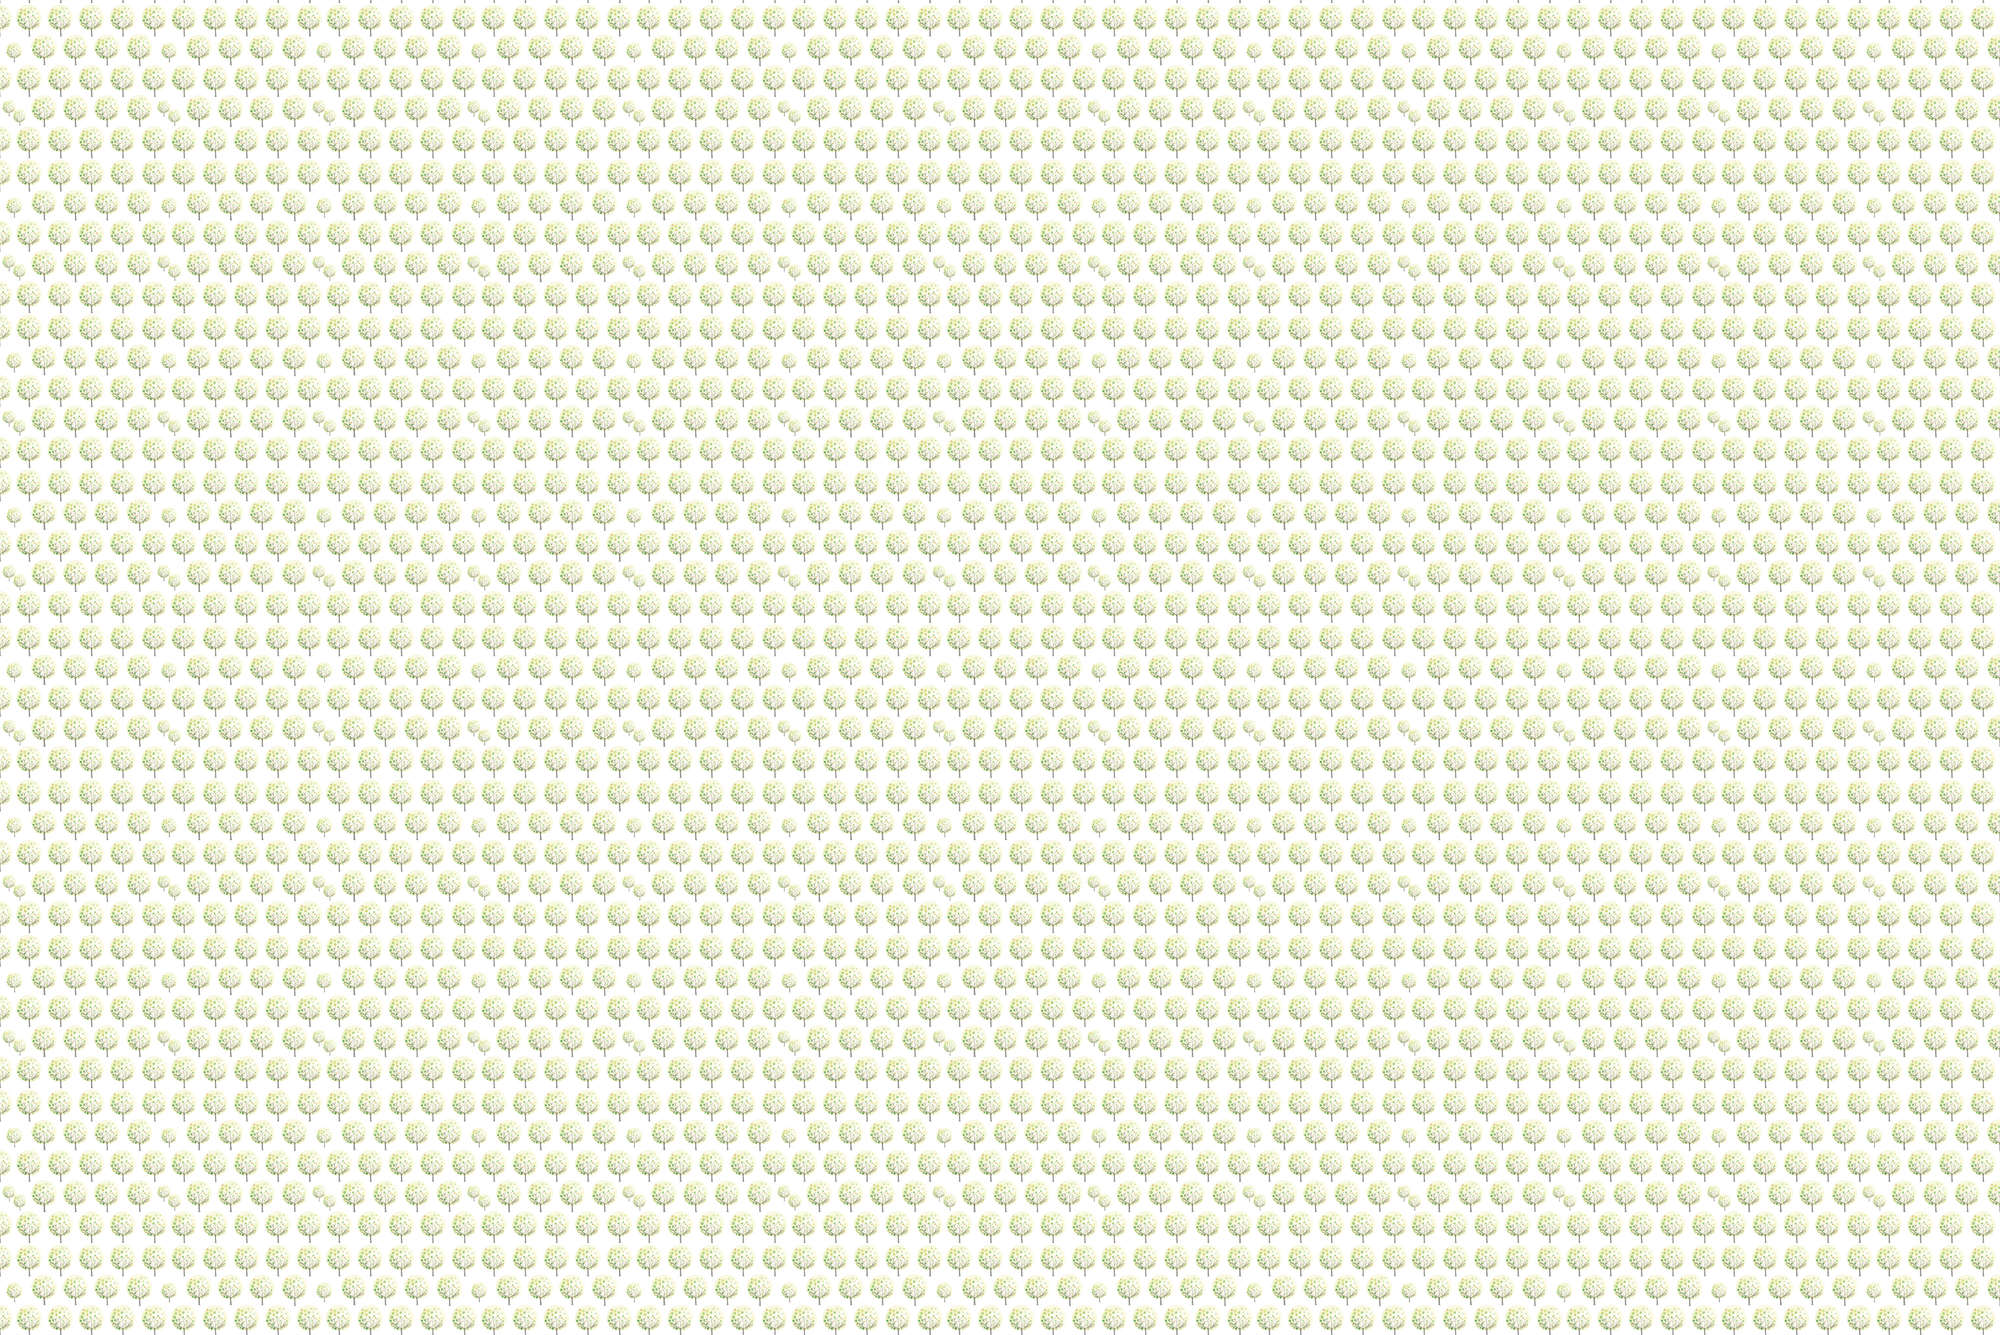             Design wall mural forest pattern in green on white background on premium smooth nonwoven
        